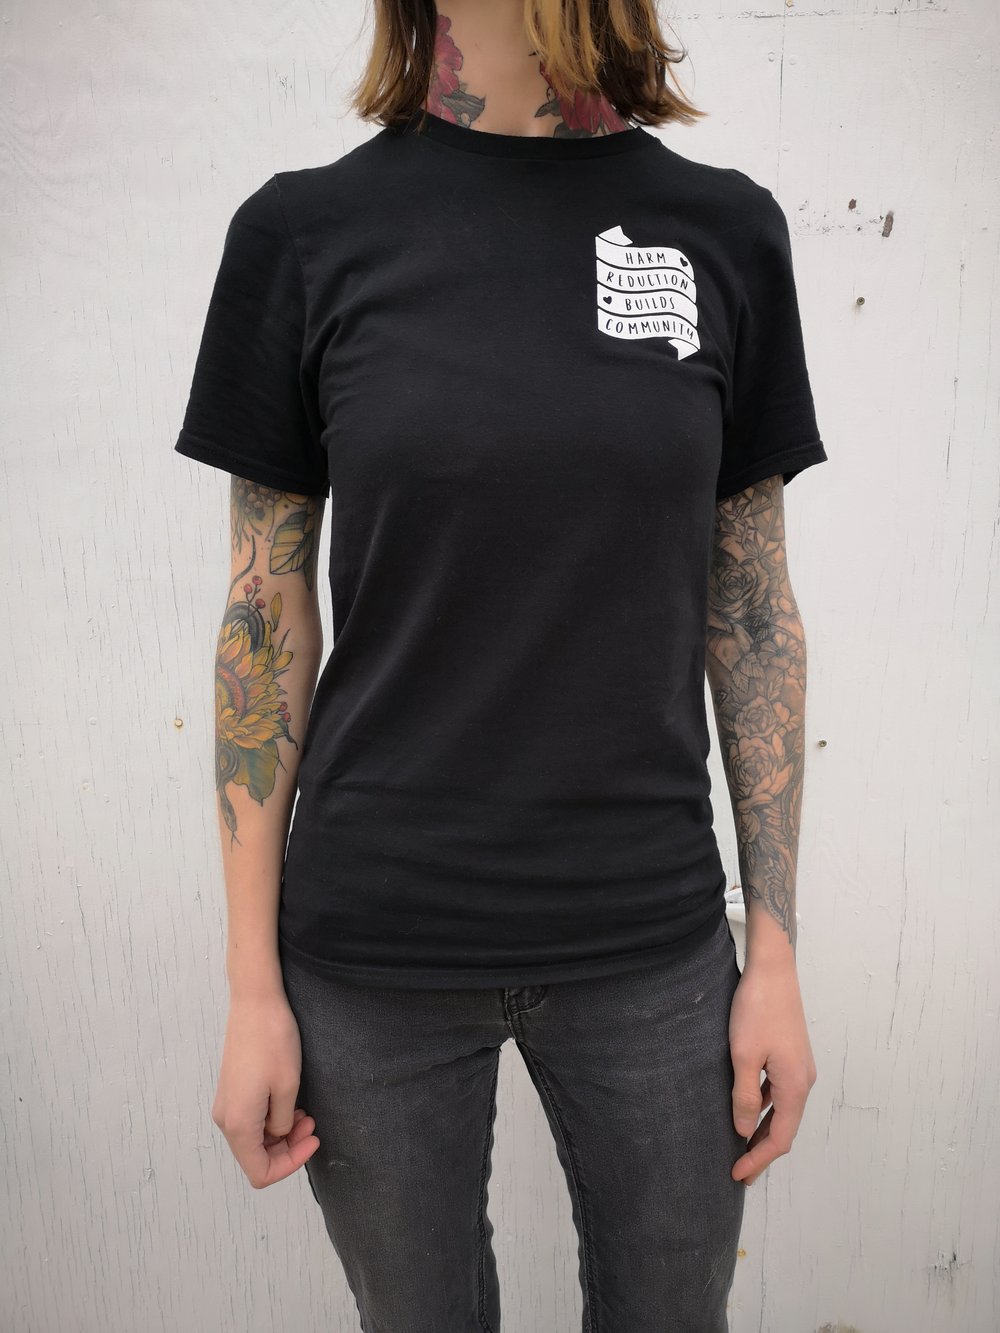 Harm Reduction tee - coming early December 